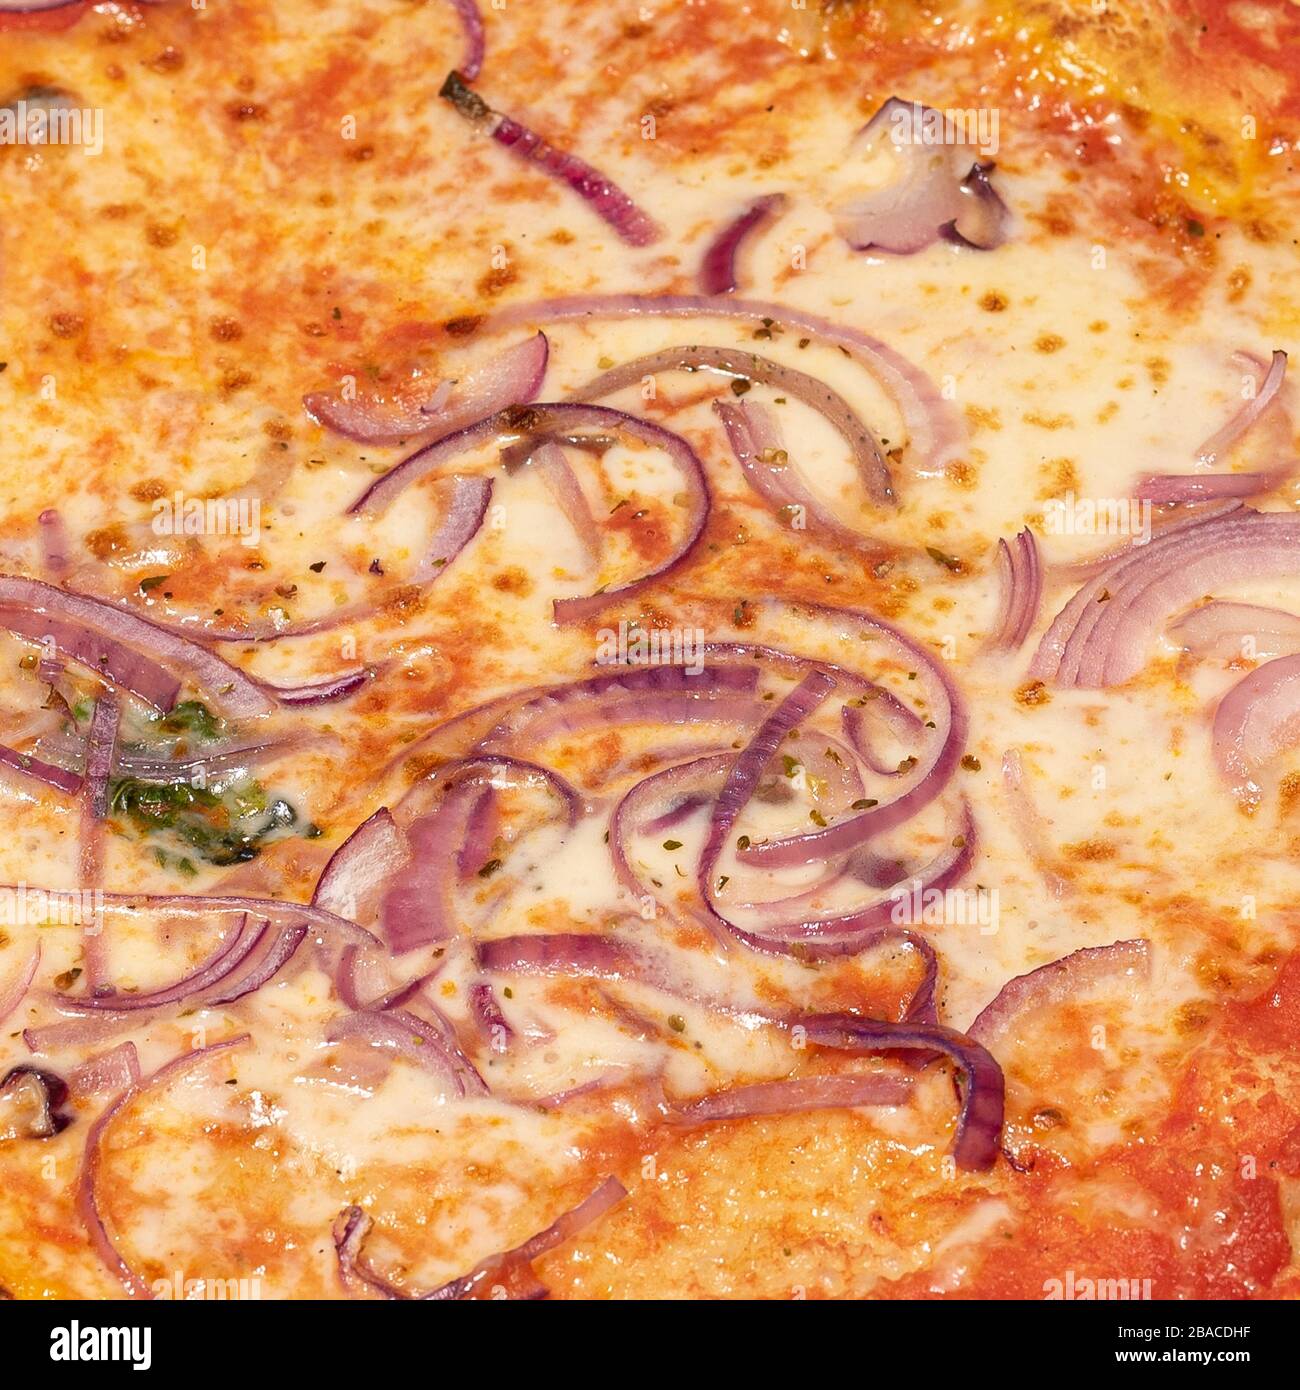 Close up shot of pizza with onions, detail of typical Italian dish, food photography Stock Photo